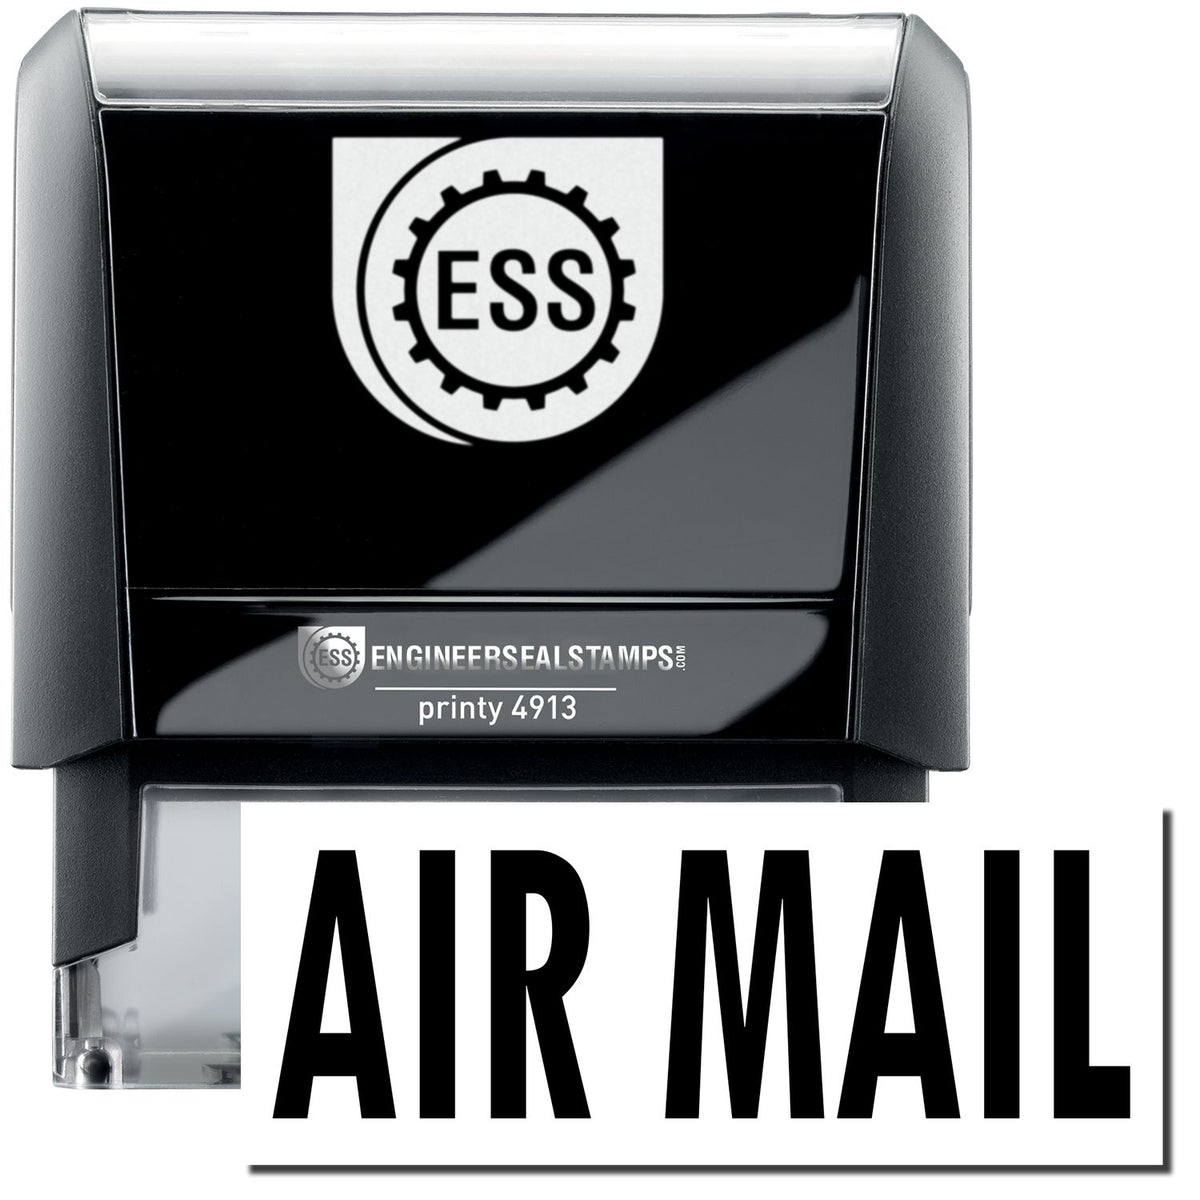 A large self-inking stamp with a stamped image showing the text &quot;AIR MAIL&quot; in large bold font.